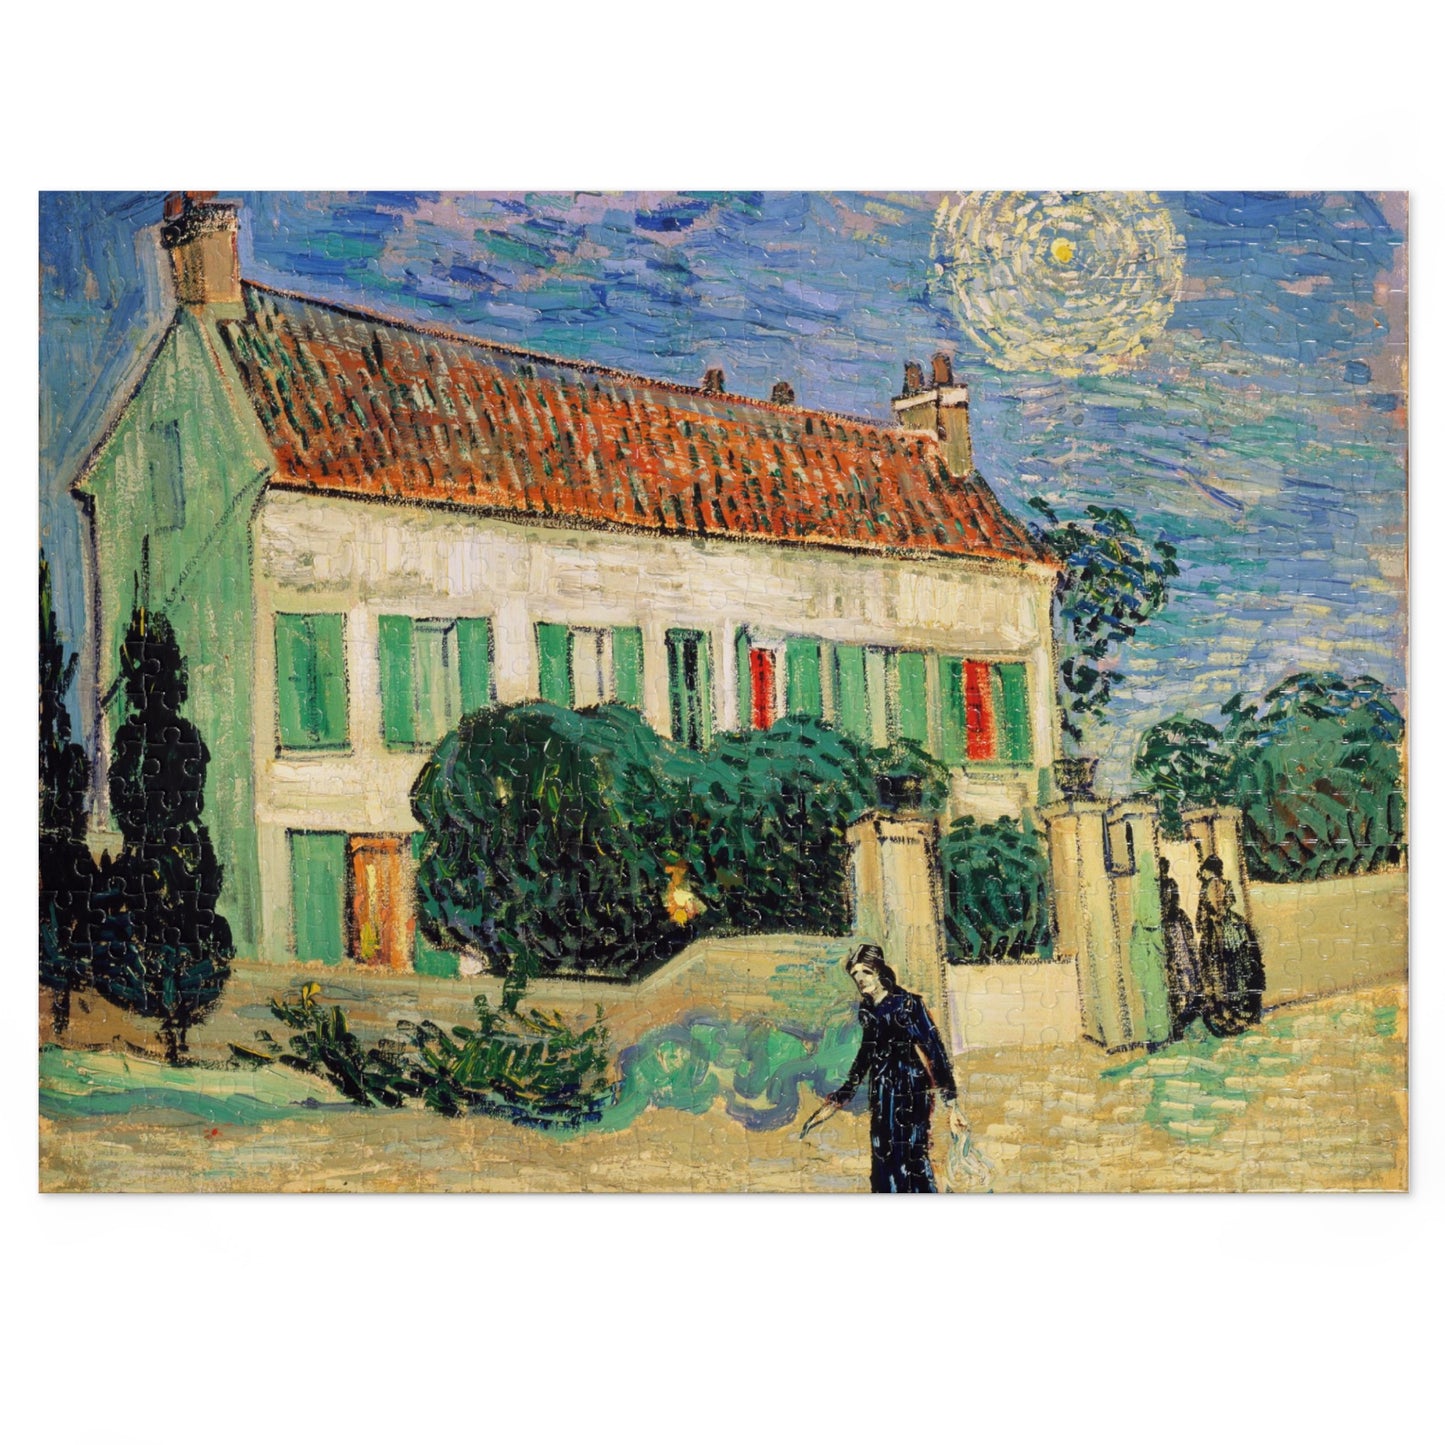 White House at Night by Vincent Van Gogh - Jigsaw Puzzle